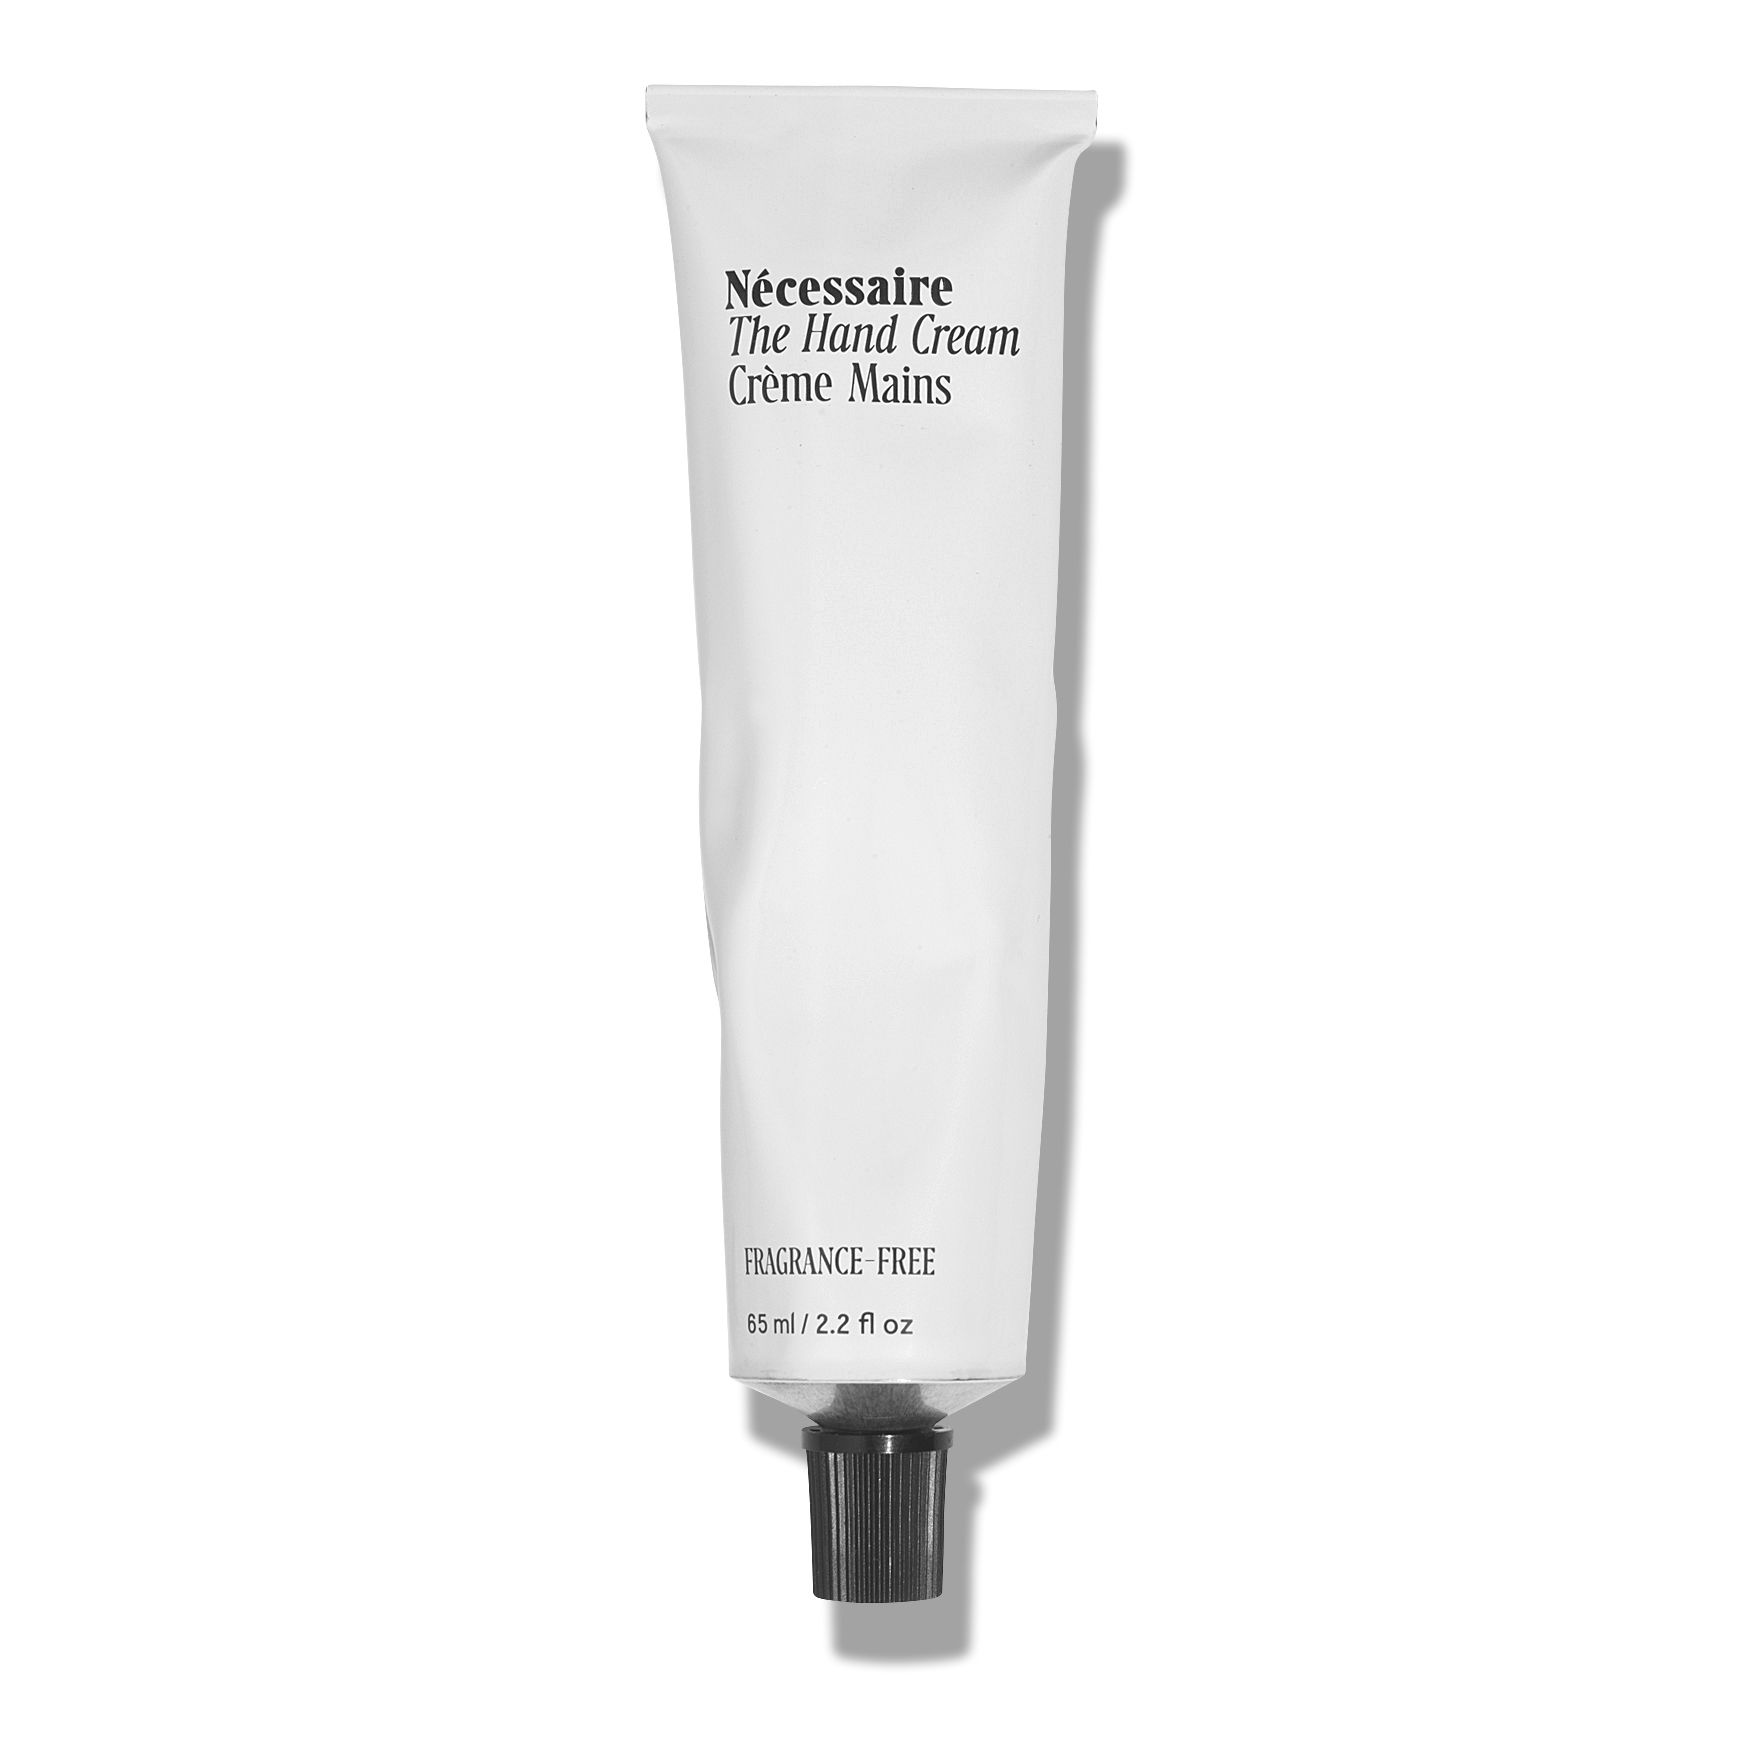 The Hand Cream Fragrance Free | Space NK - UK